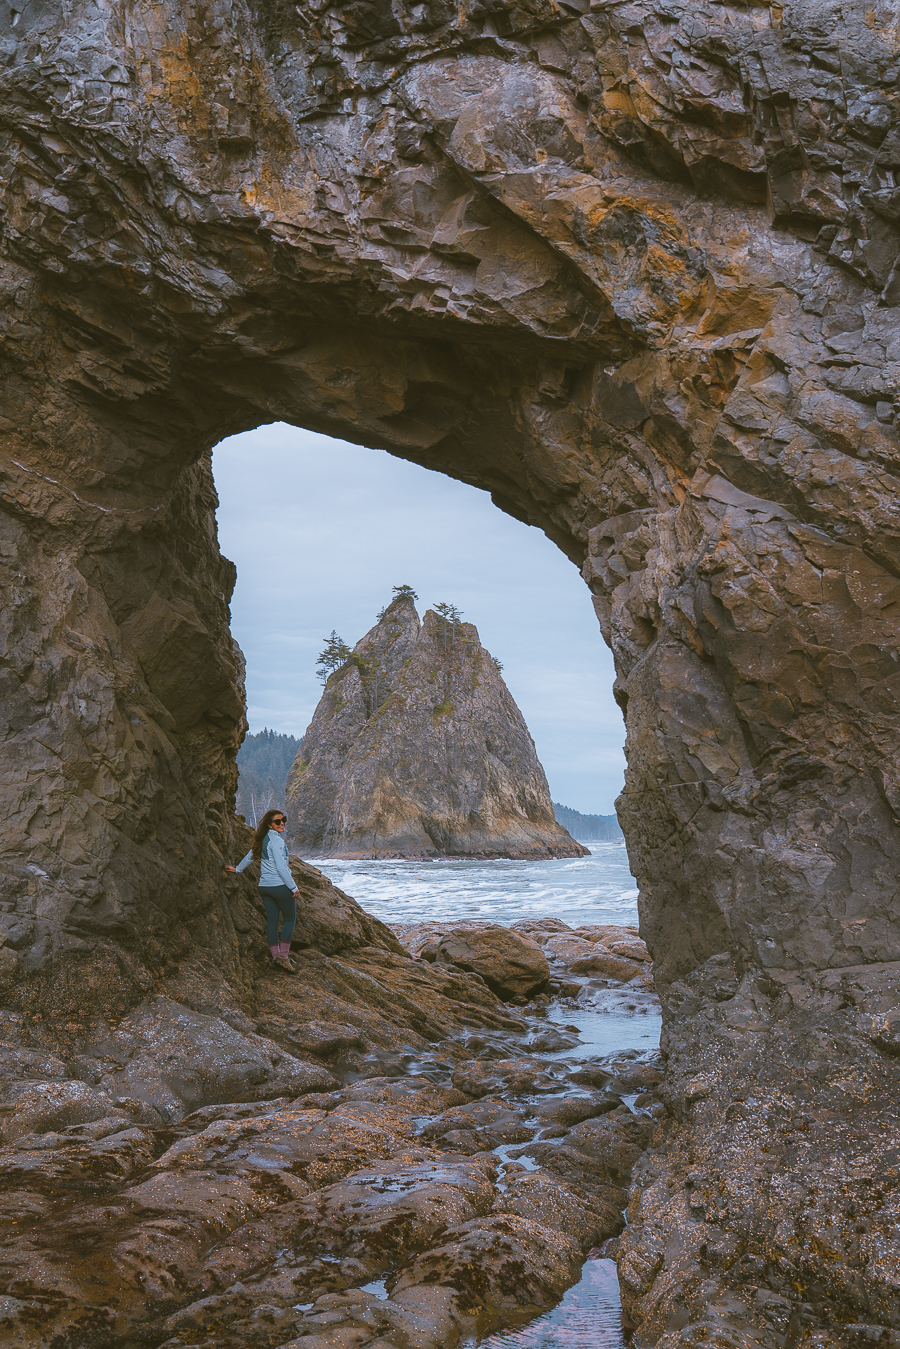 Where to Stay in Olympic National Park